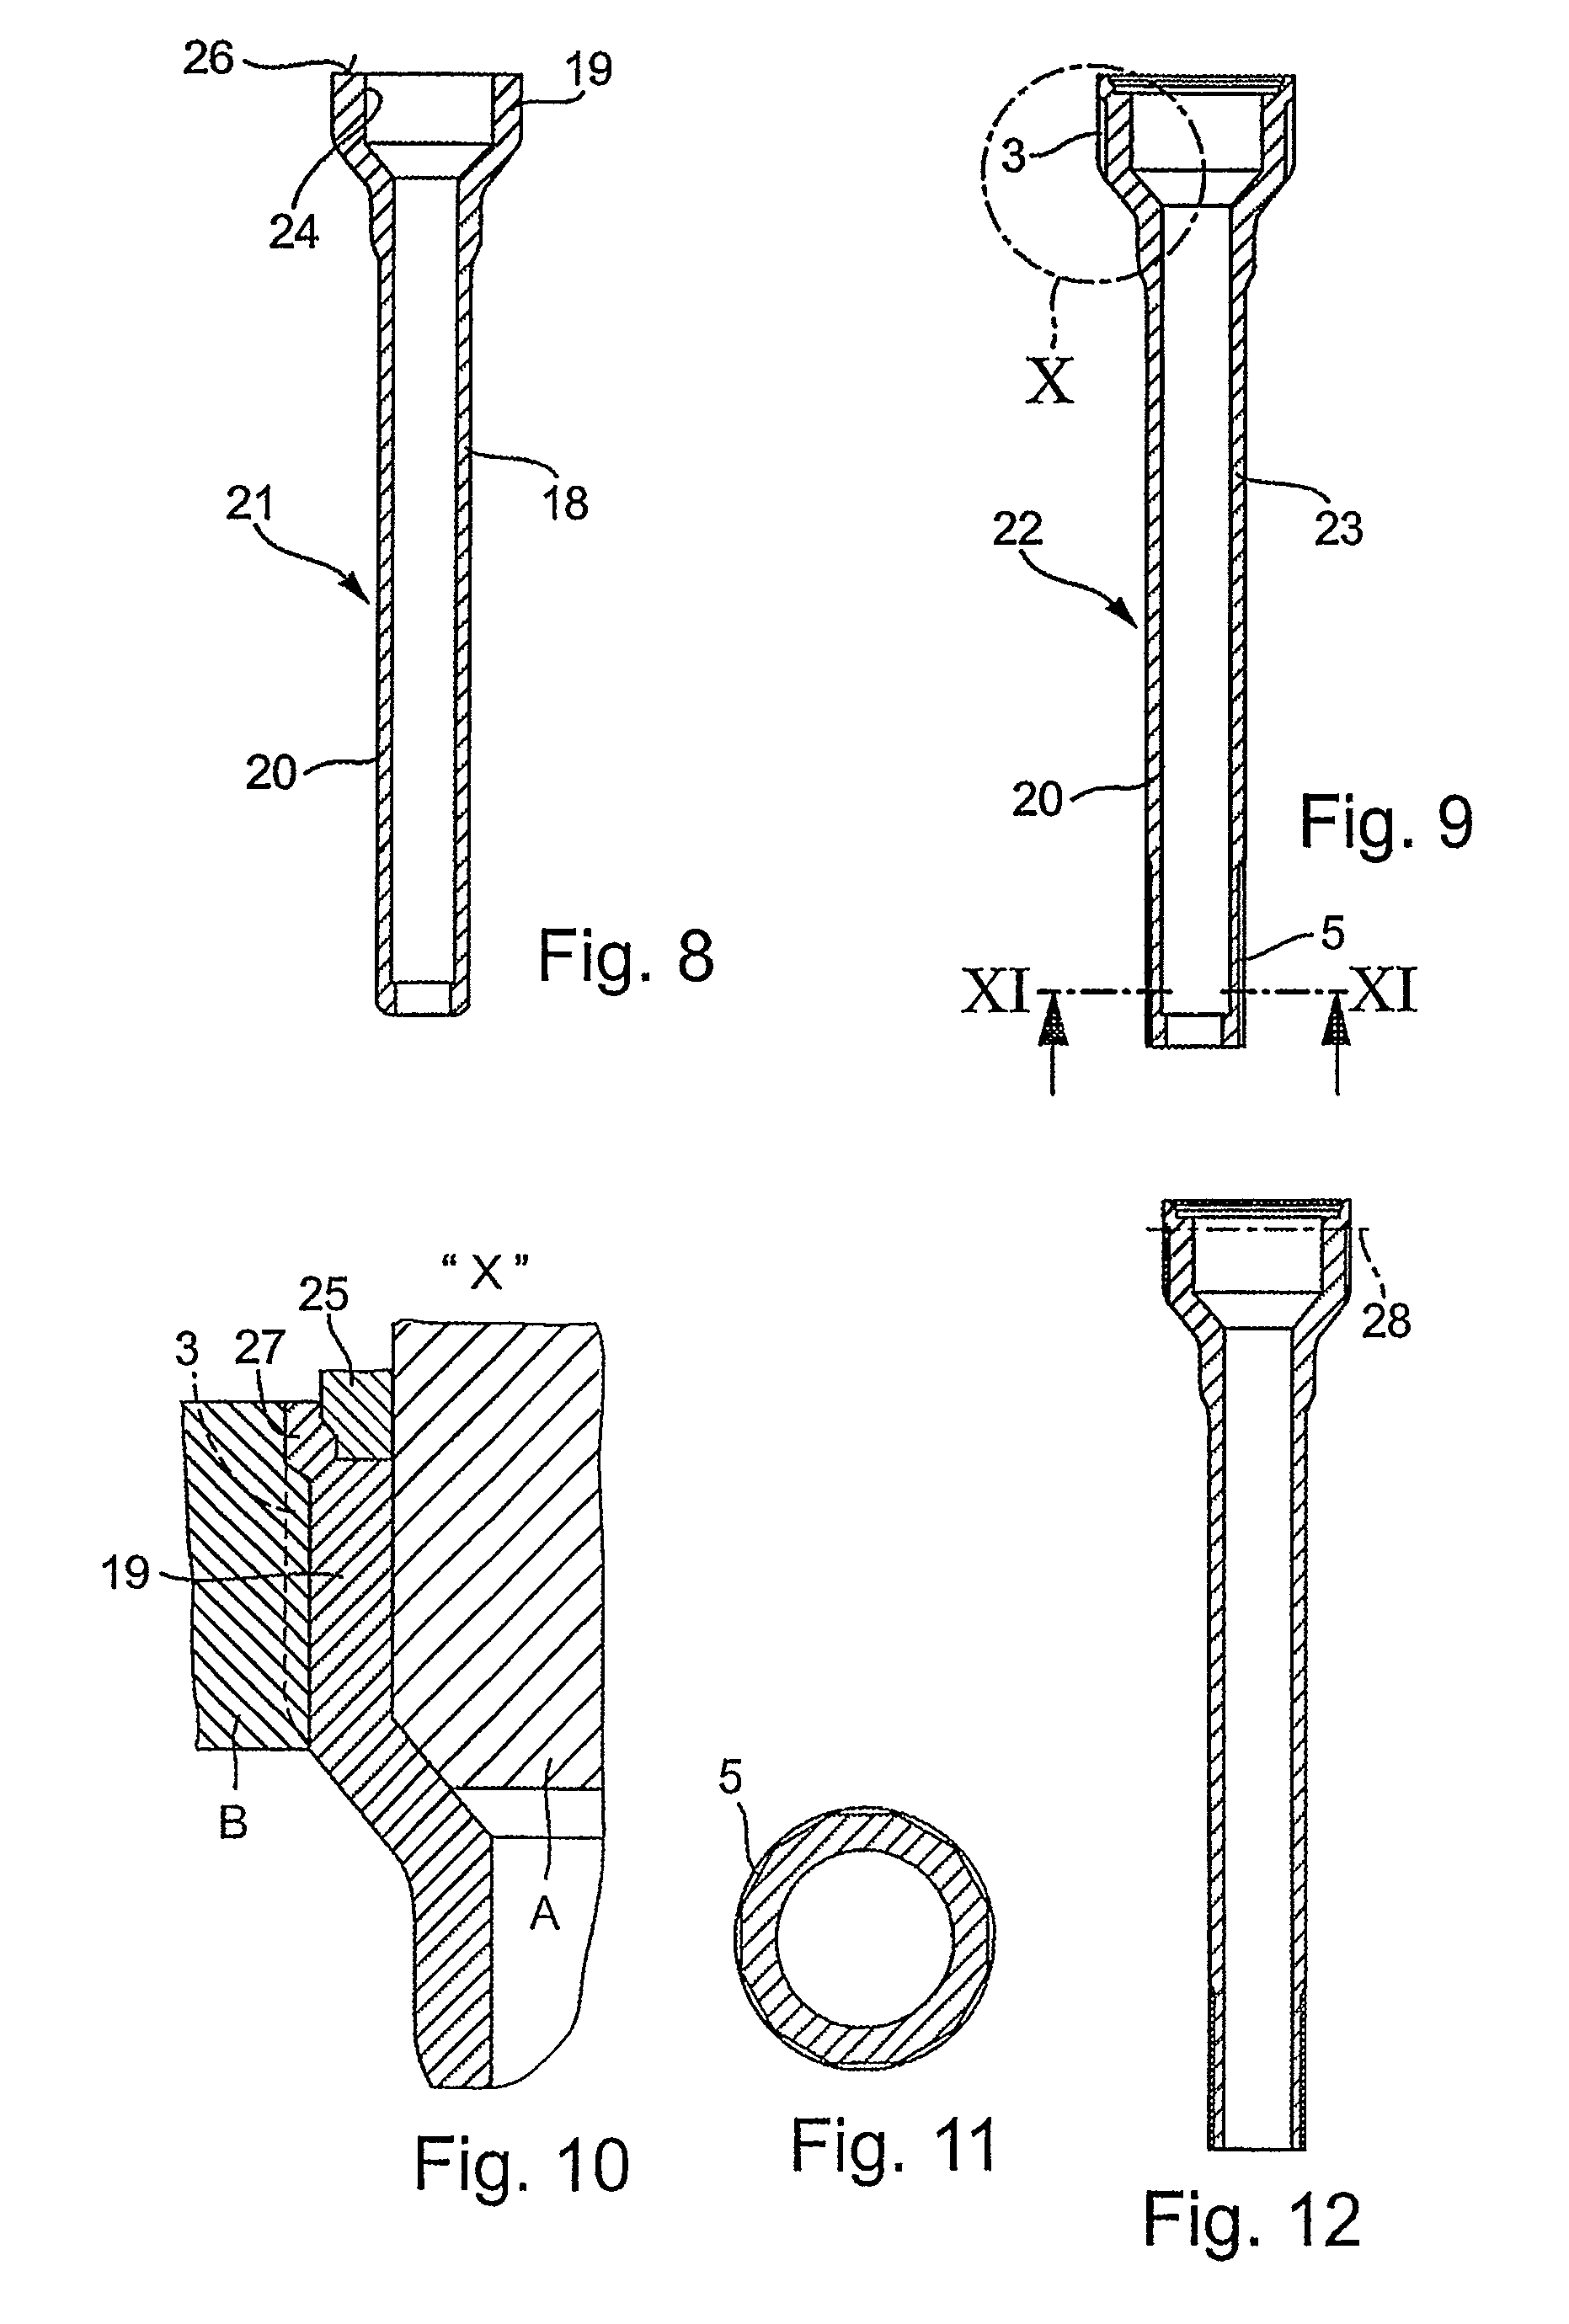 Method of producing a hollow shaft